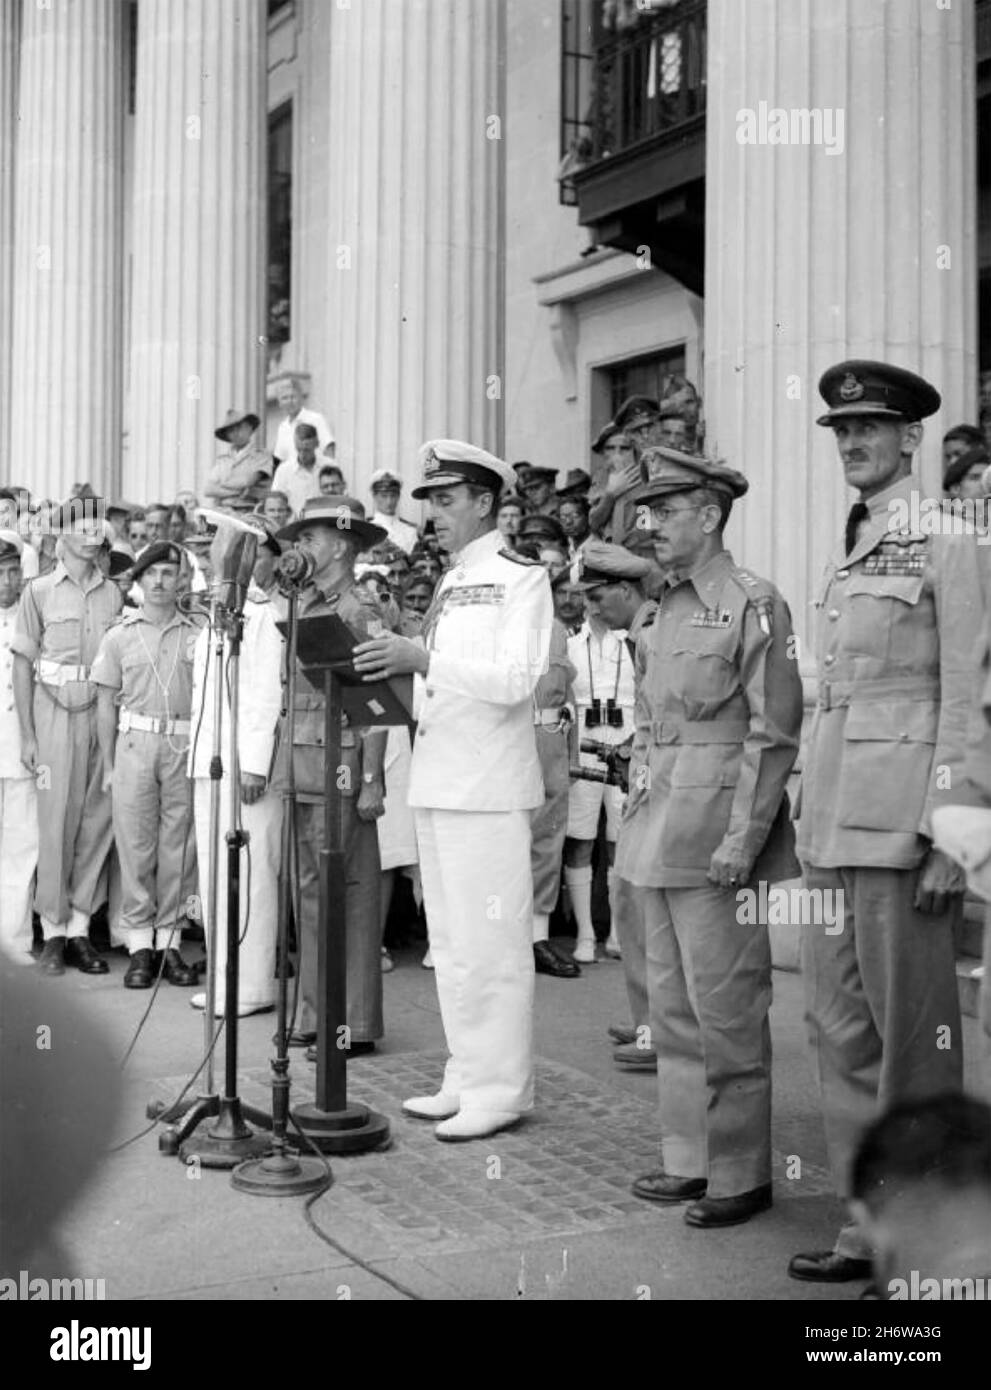 LOUIS MOUNTBATTEN, 1st Earl Mountbatten of Burma (1900-1979) Royal Navy officer and statesman making a speech at Singapore's Municipal Building in January 1945 after the Japanese surrender. To his right is General William Slim in slouch hat, To his left are Lieutenant General Wheeler of the US Army and the tall figure of Air Chief Marshal Sir Keith Park, Stock Photo